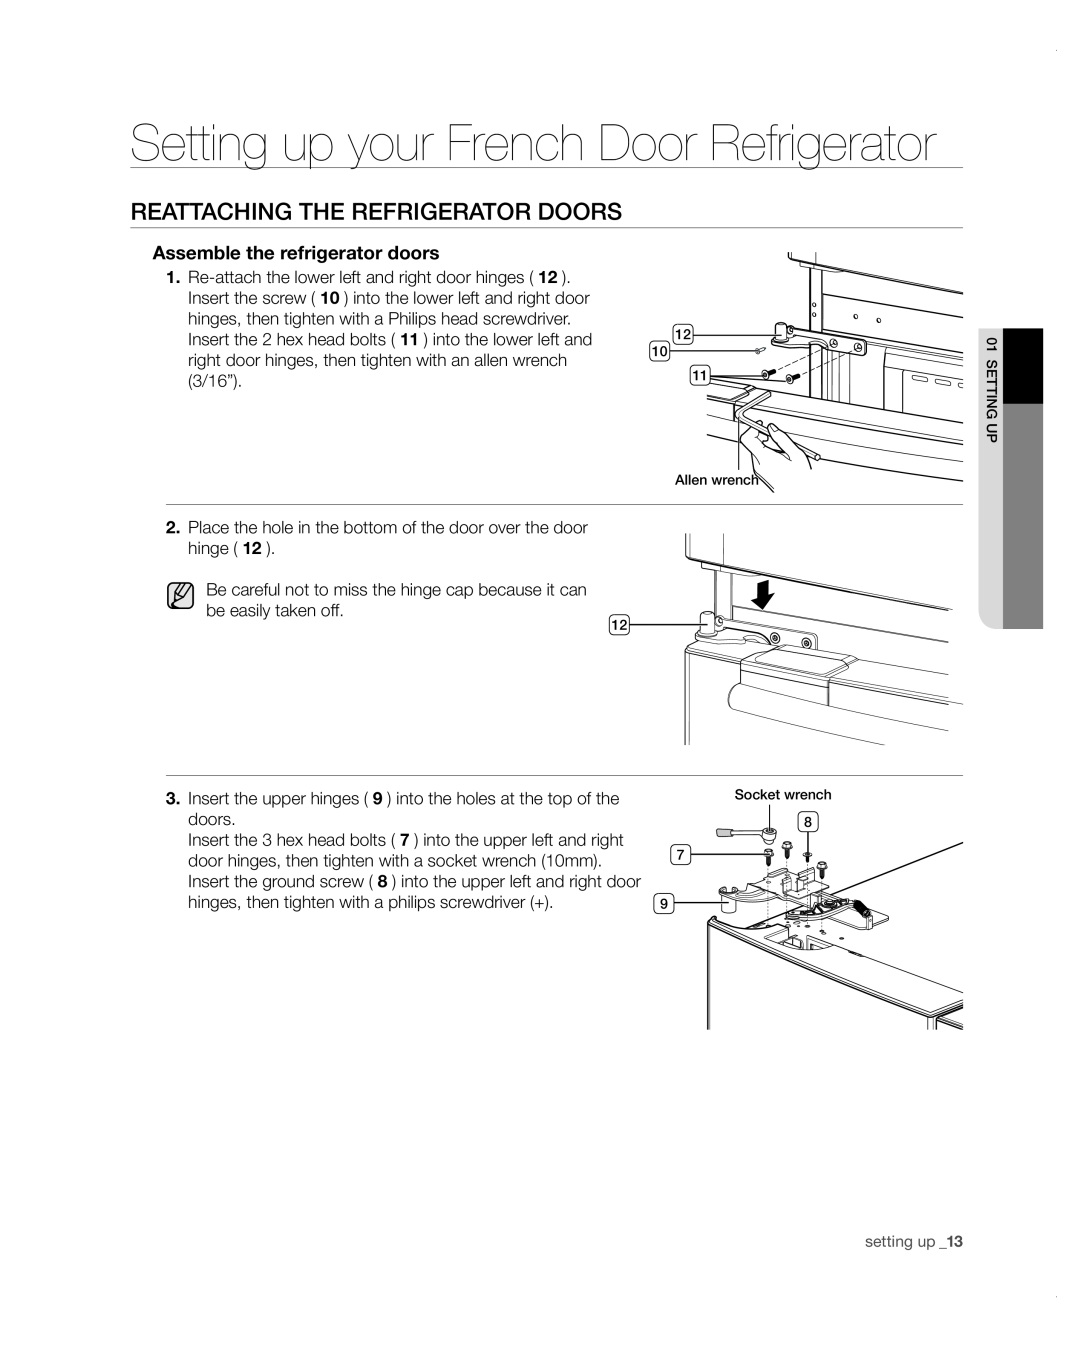 Samsung RF4287HARS user manual Reattaching the refrigerator doors, Setting up your French Door Refrigerator 